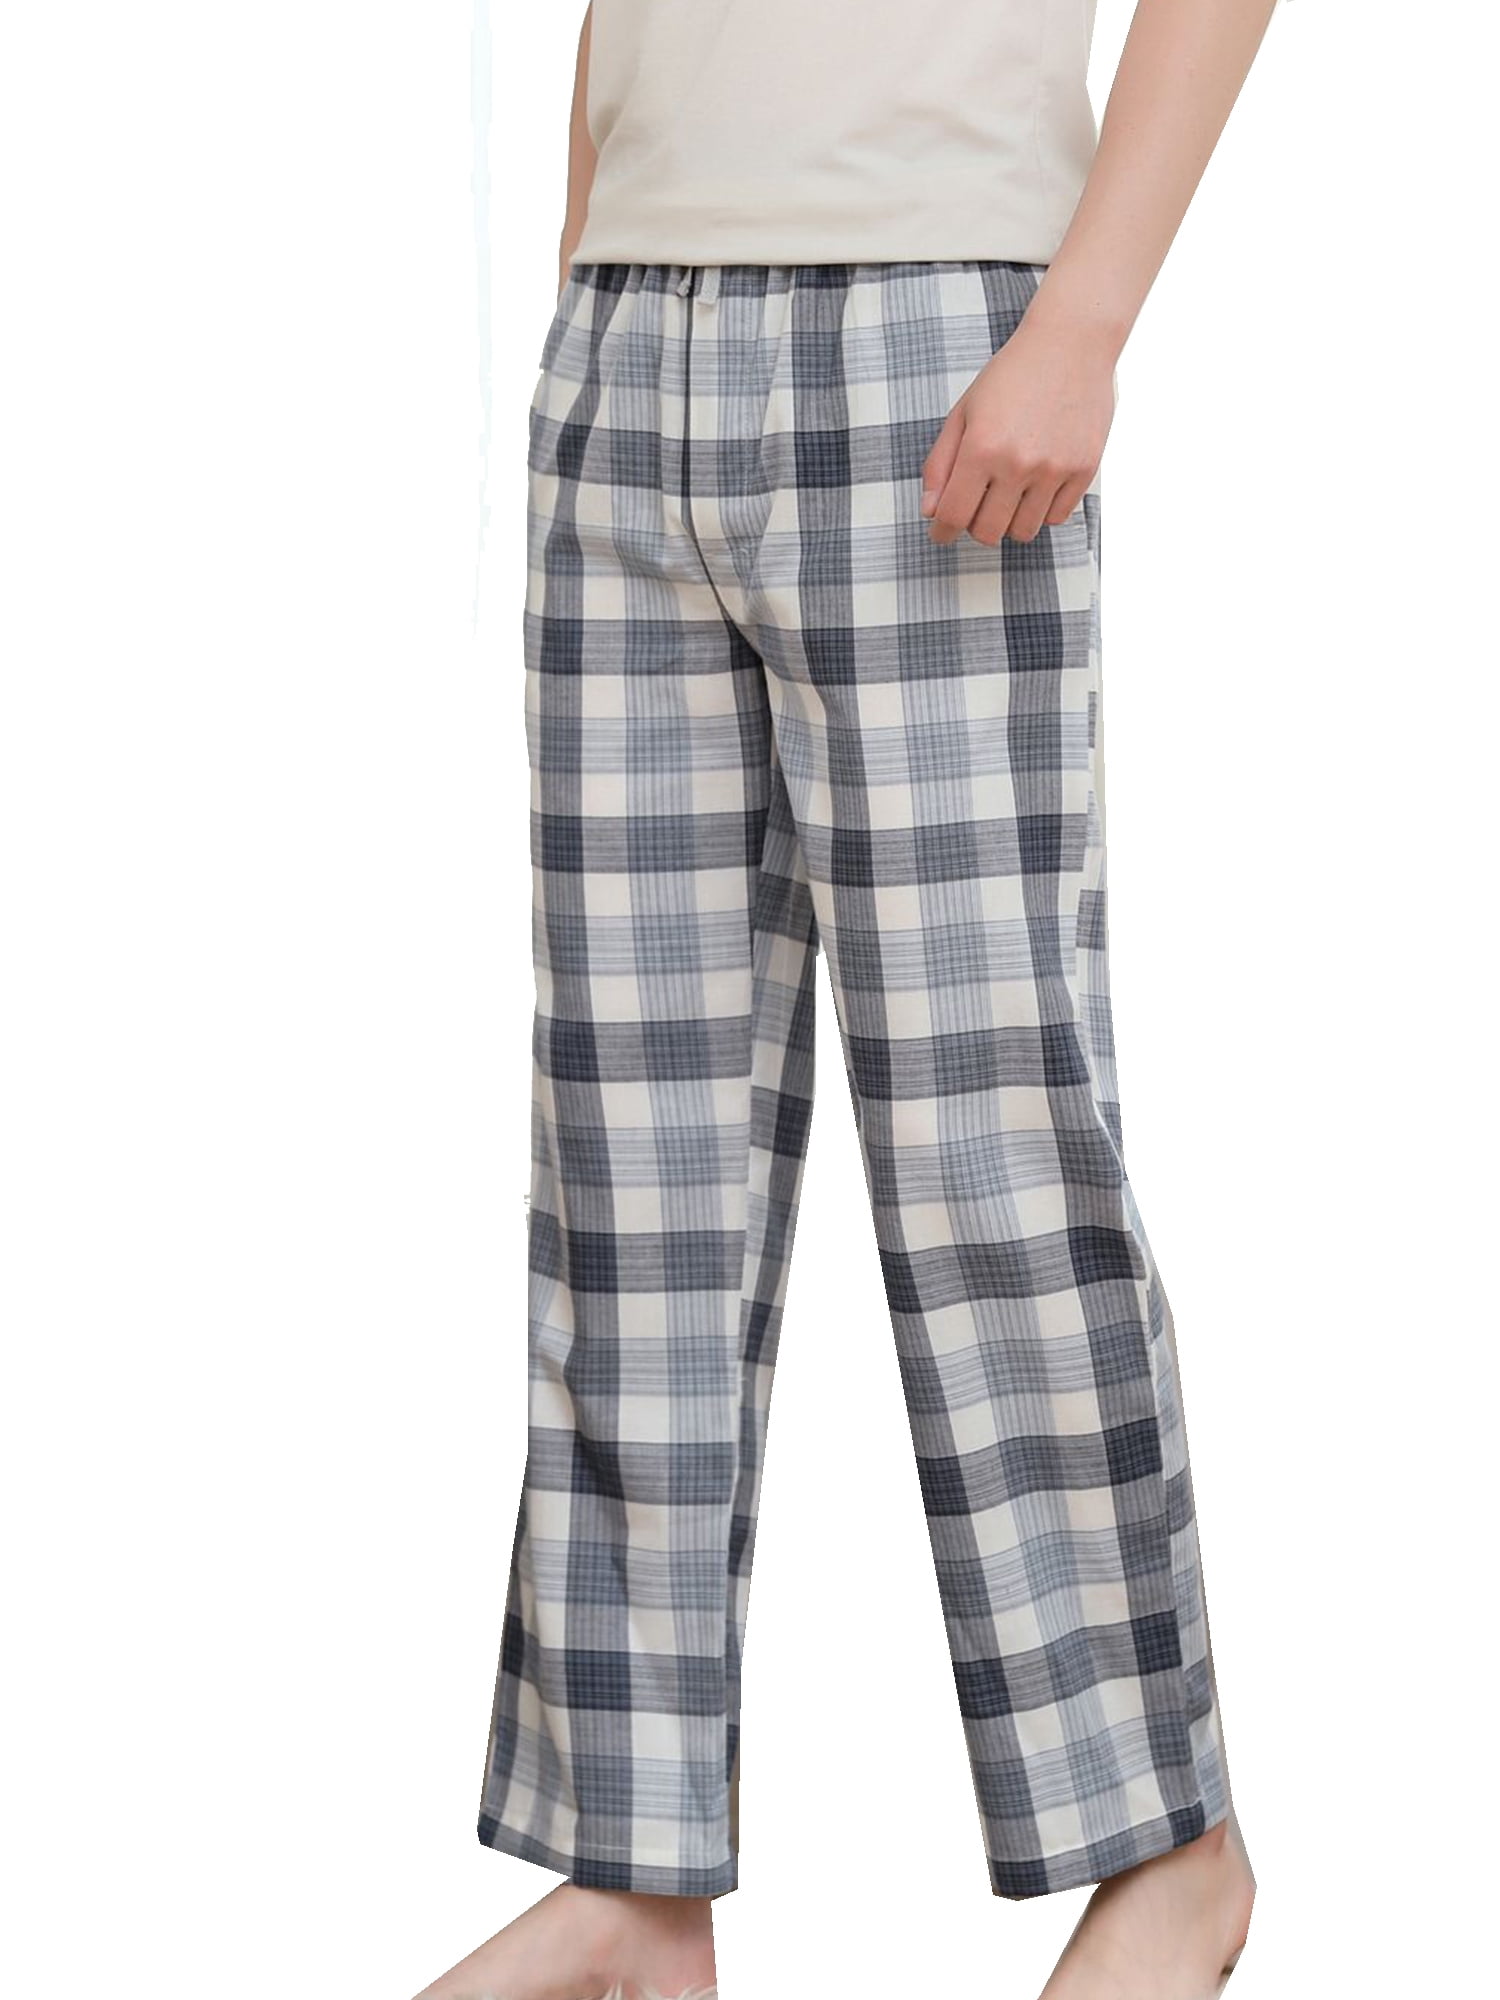 Mens Lounge Pants Pyjama Shorts 100% Jersey Cotton or Woven Bottoms Night Bed 